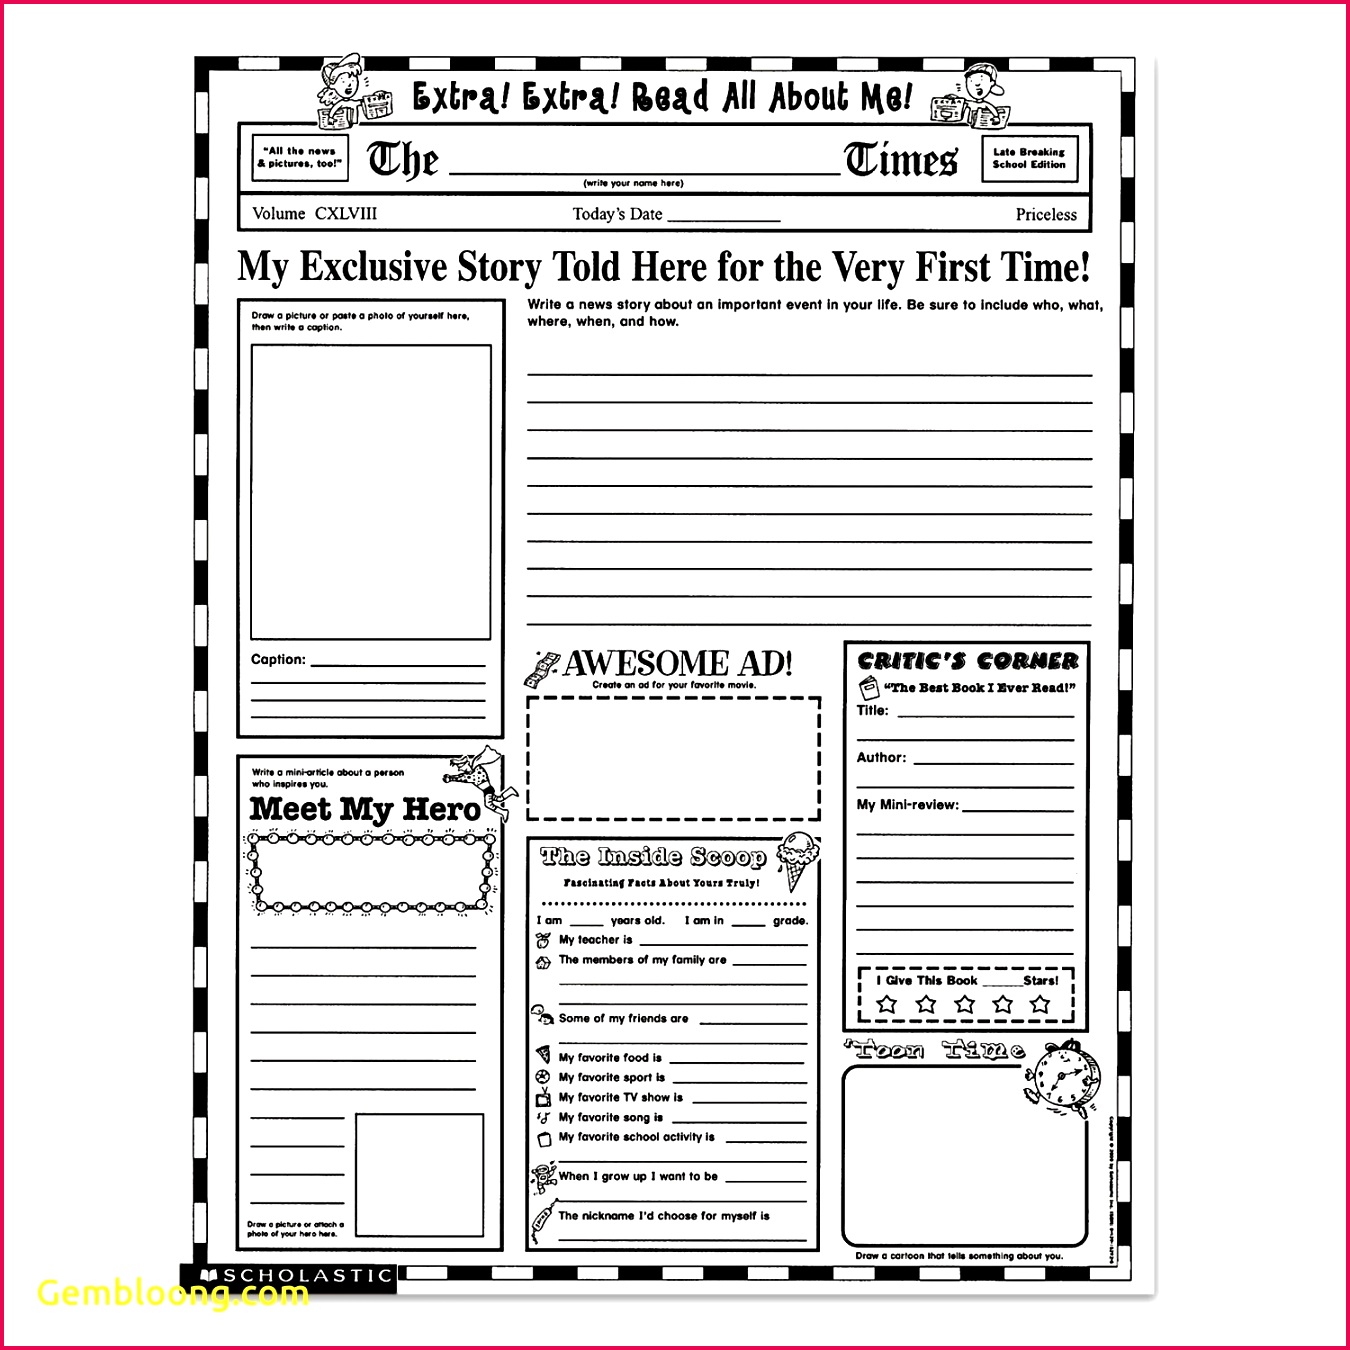 Google Sheets Time Card Template formal New Table Contents Template Google Docs